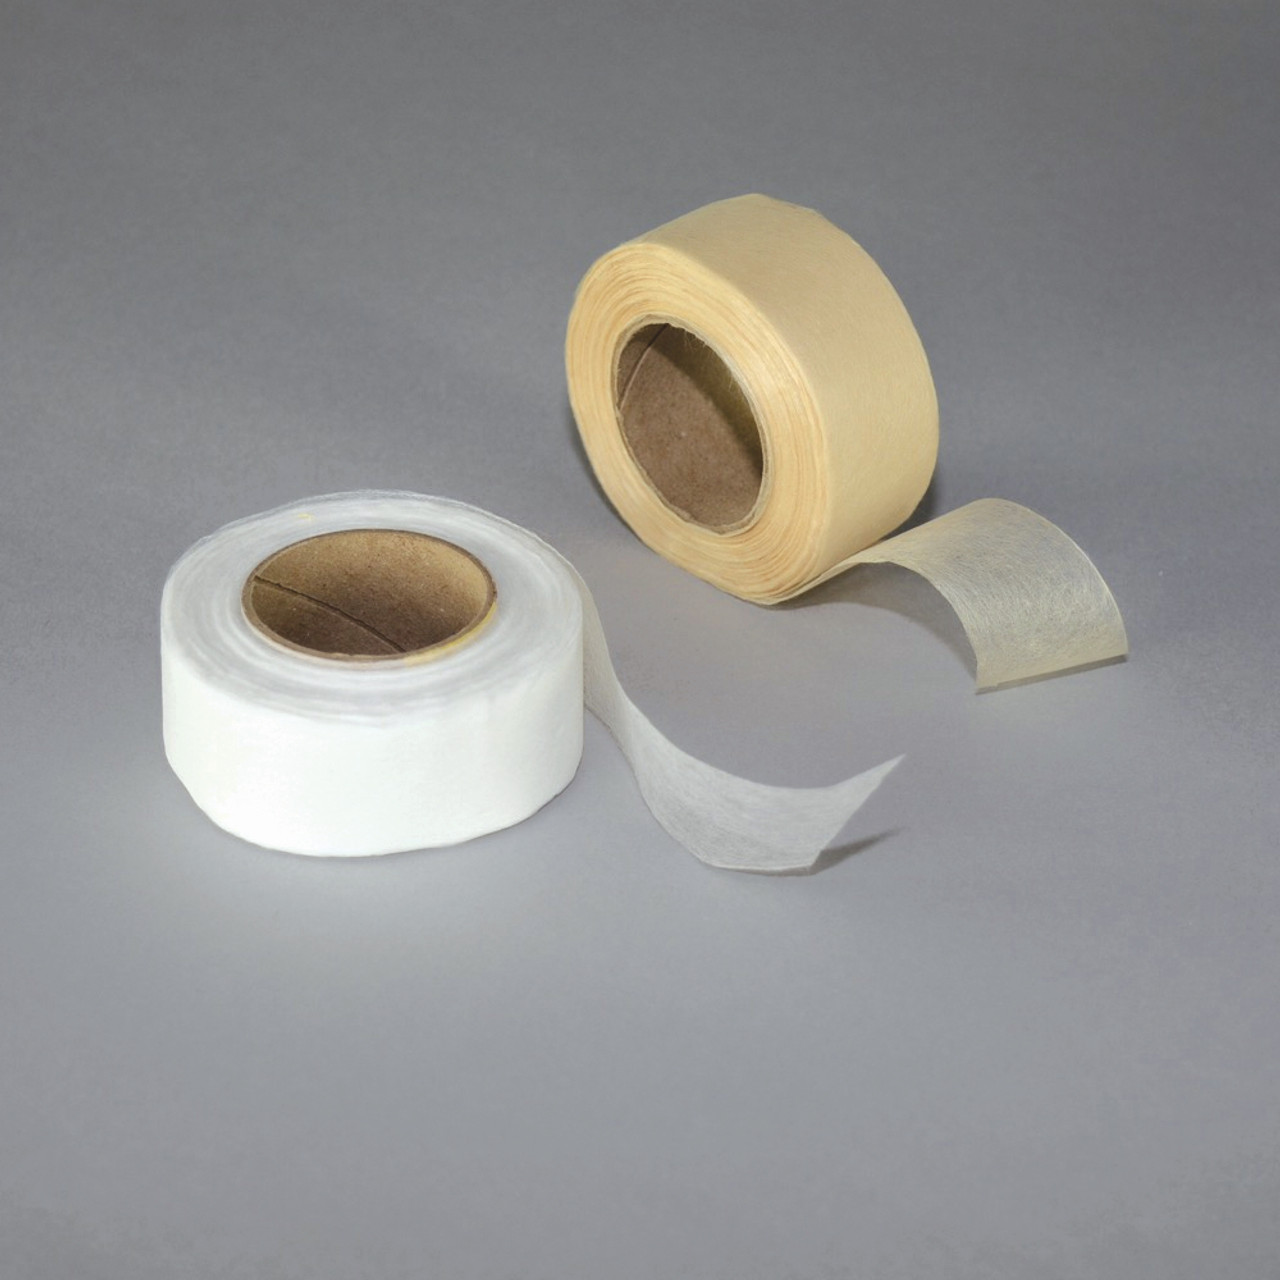 What is acid free tape? What is archival tape? and why should you use it -  Preservation Equipment Ltd